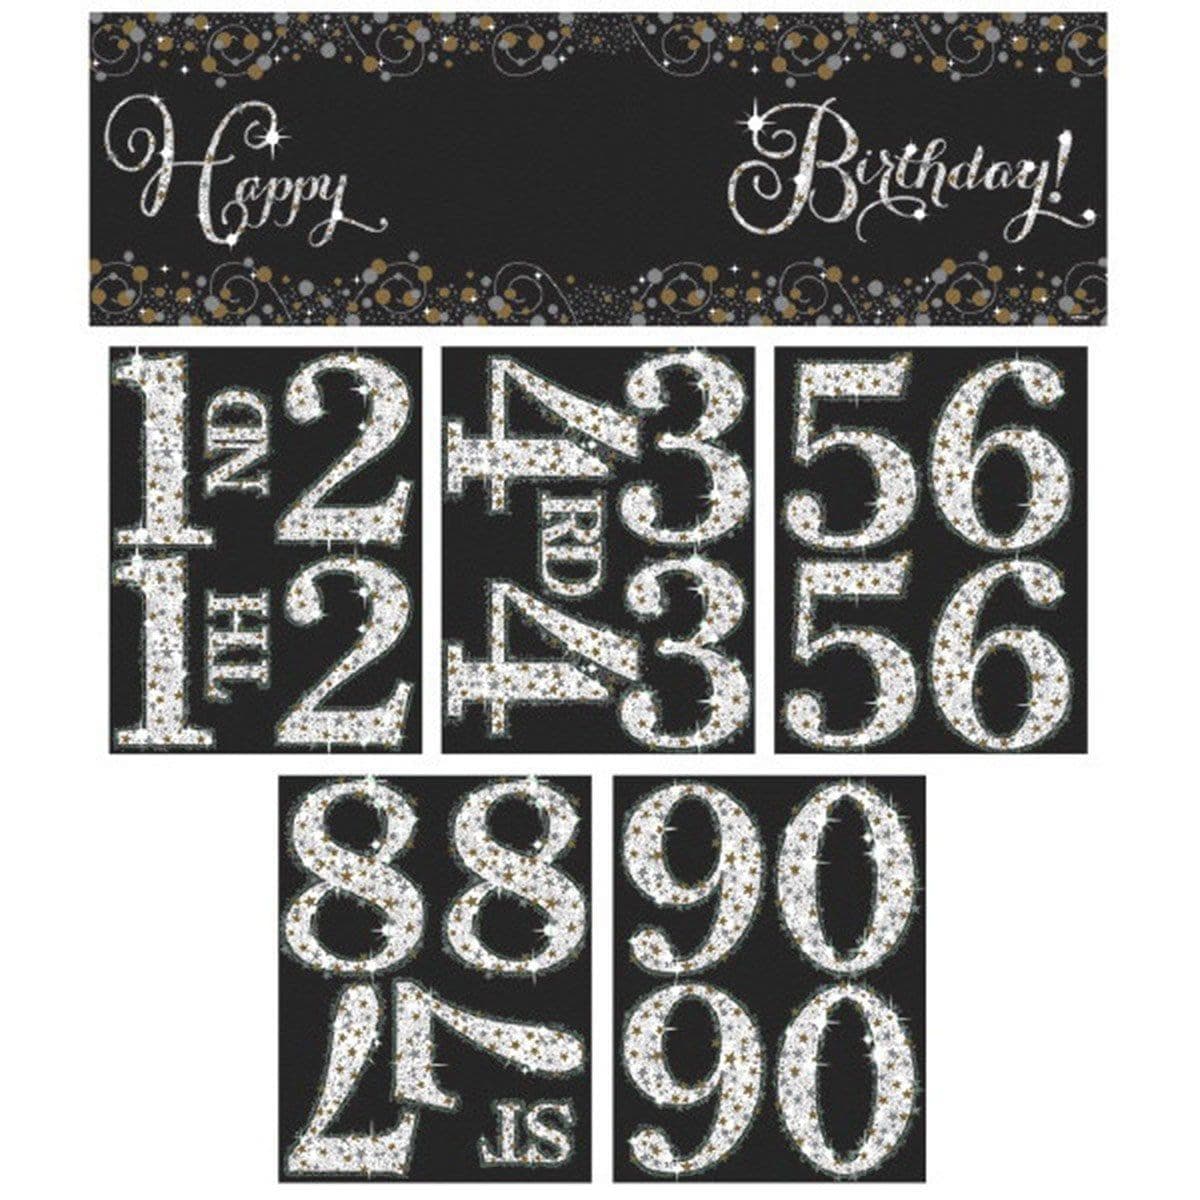 Buy Age Specific Birthday Custom Sparkling Celeb - Giant Banner sold at Party Expert